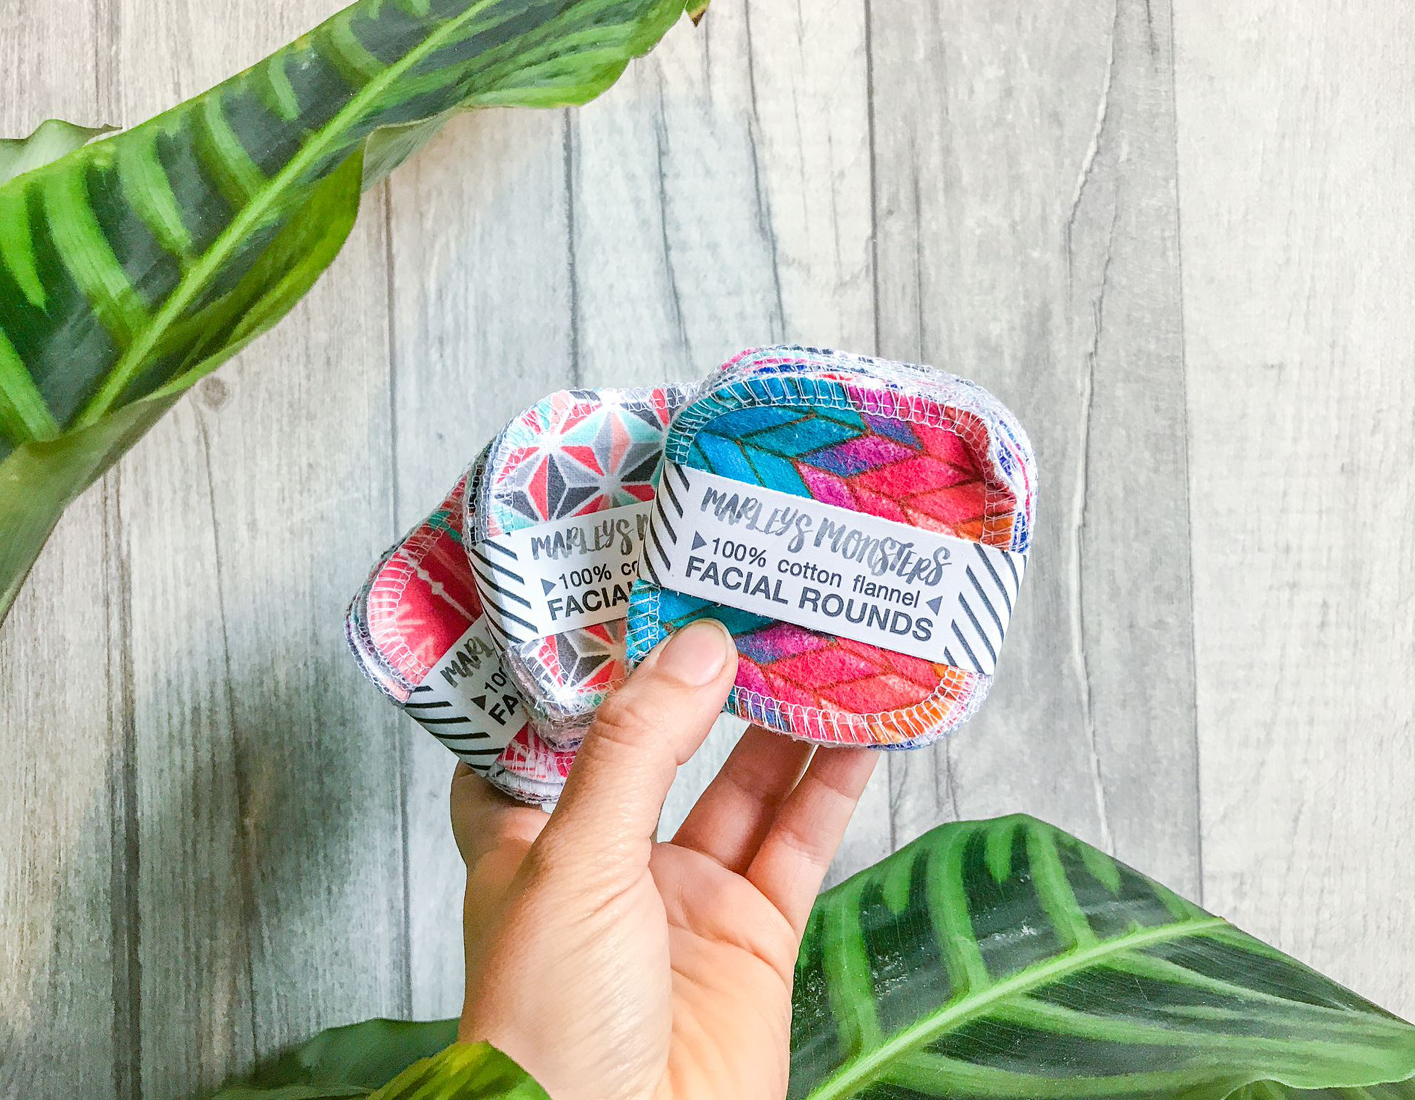 Reusable cotton rounds, are one of the waste-free swaps Beth Noy of Plastic Freedom recommends